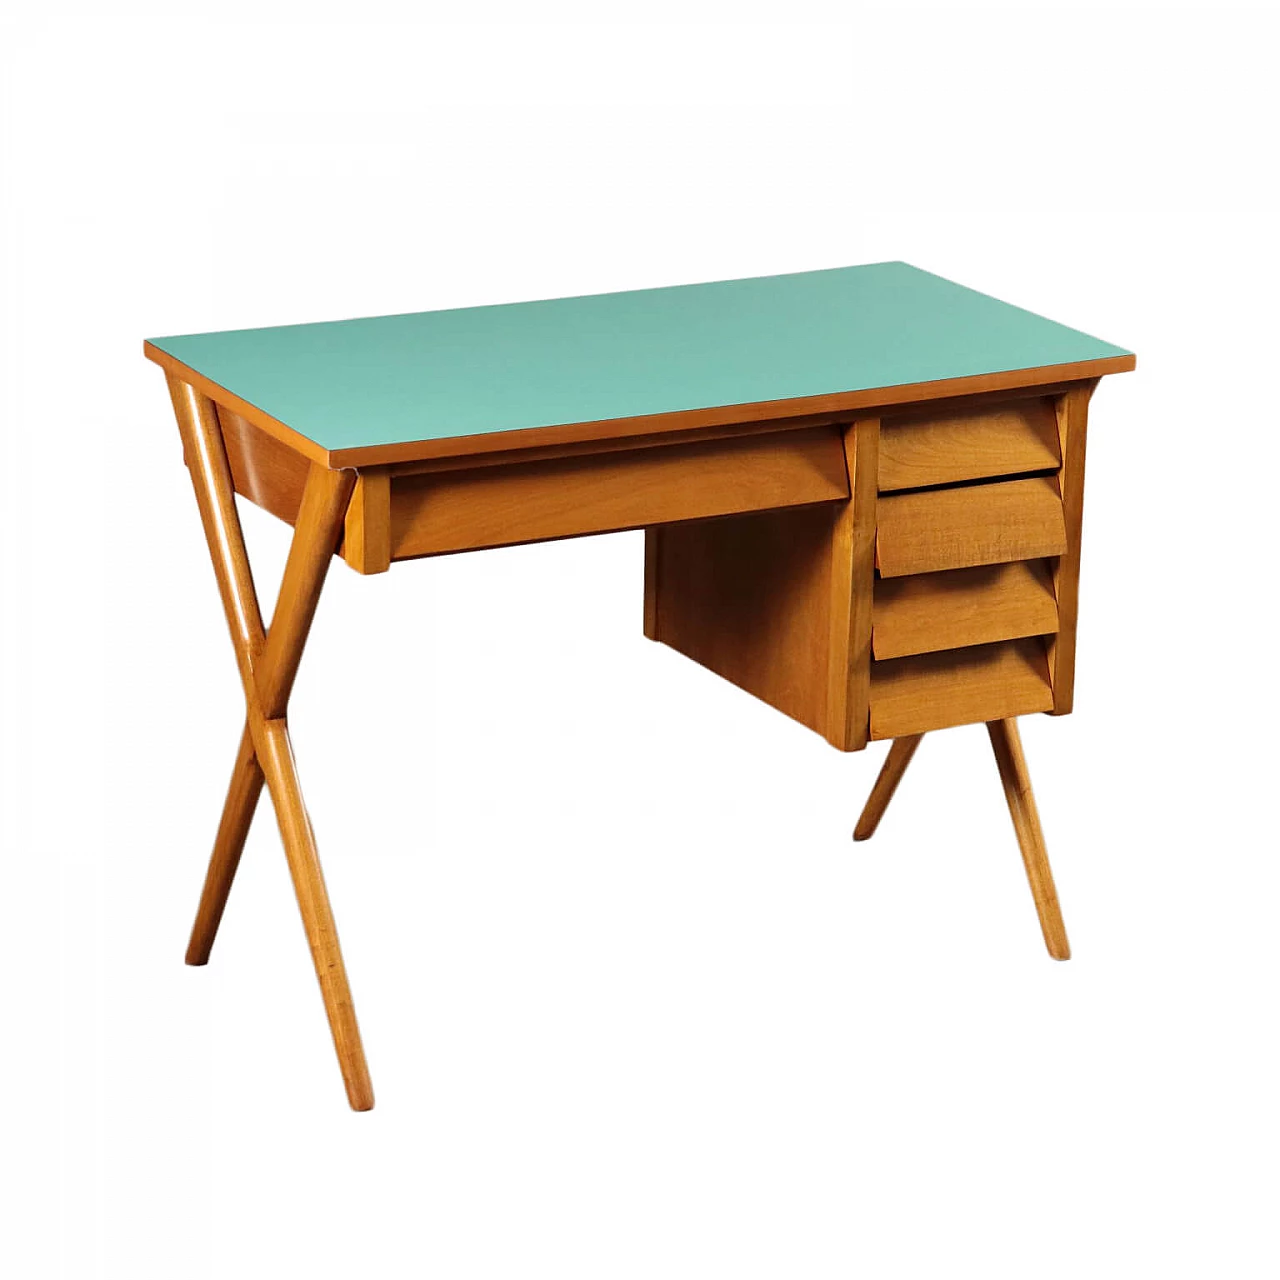 Beechwood writing desk with formica top, 1950s 1160726